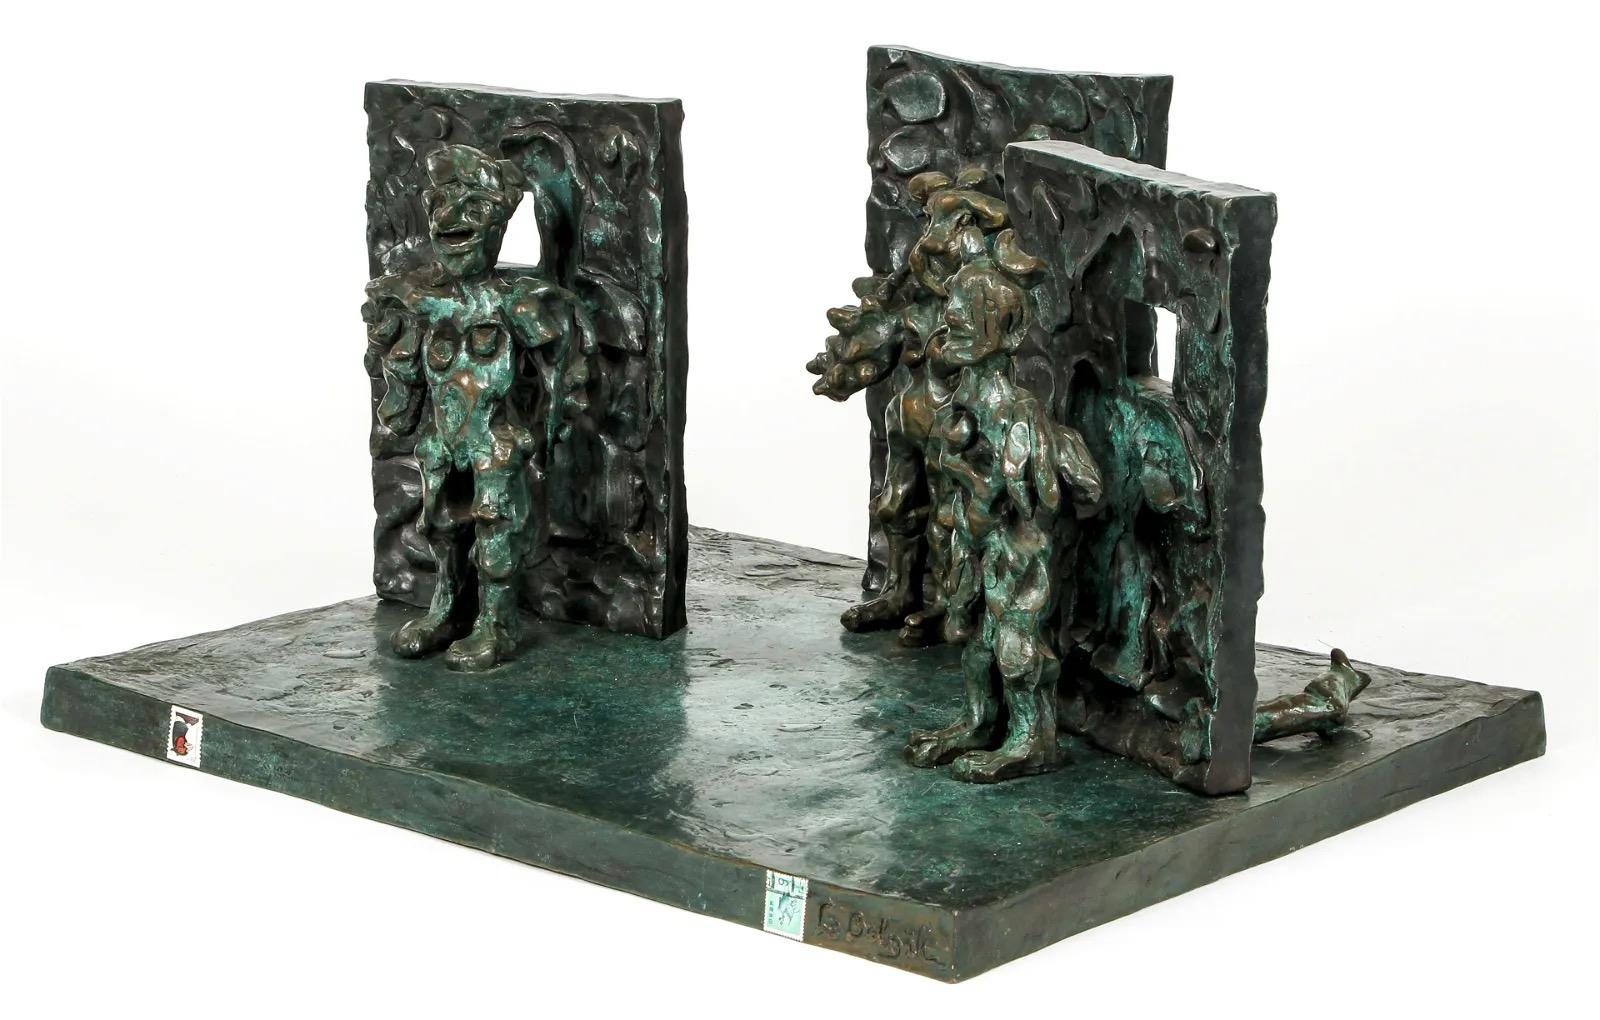 Three human bird figures (1984), cast and welded bronze and leather signed by the artist, Bob La Bobgah, front right edge of the base.
 